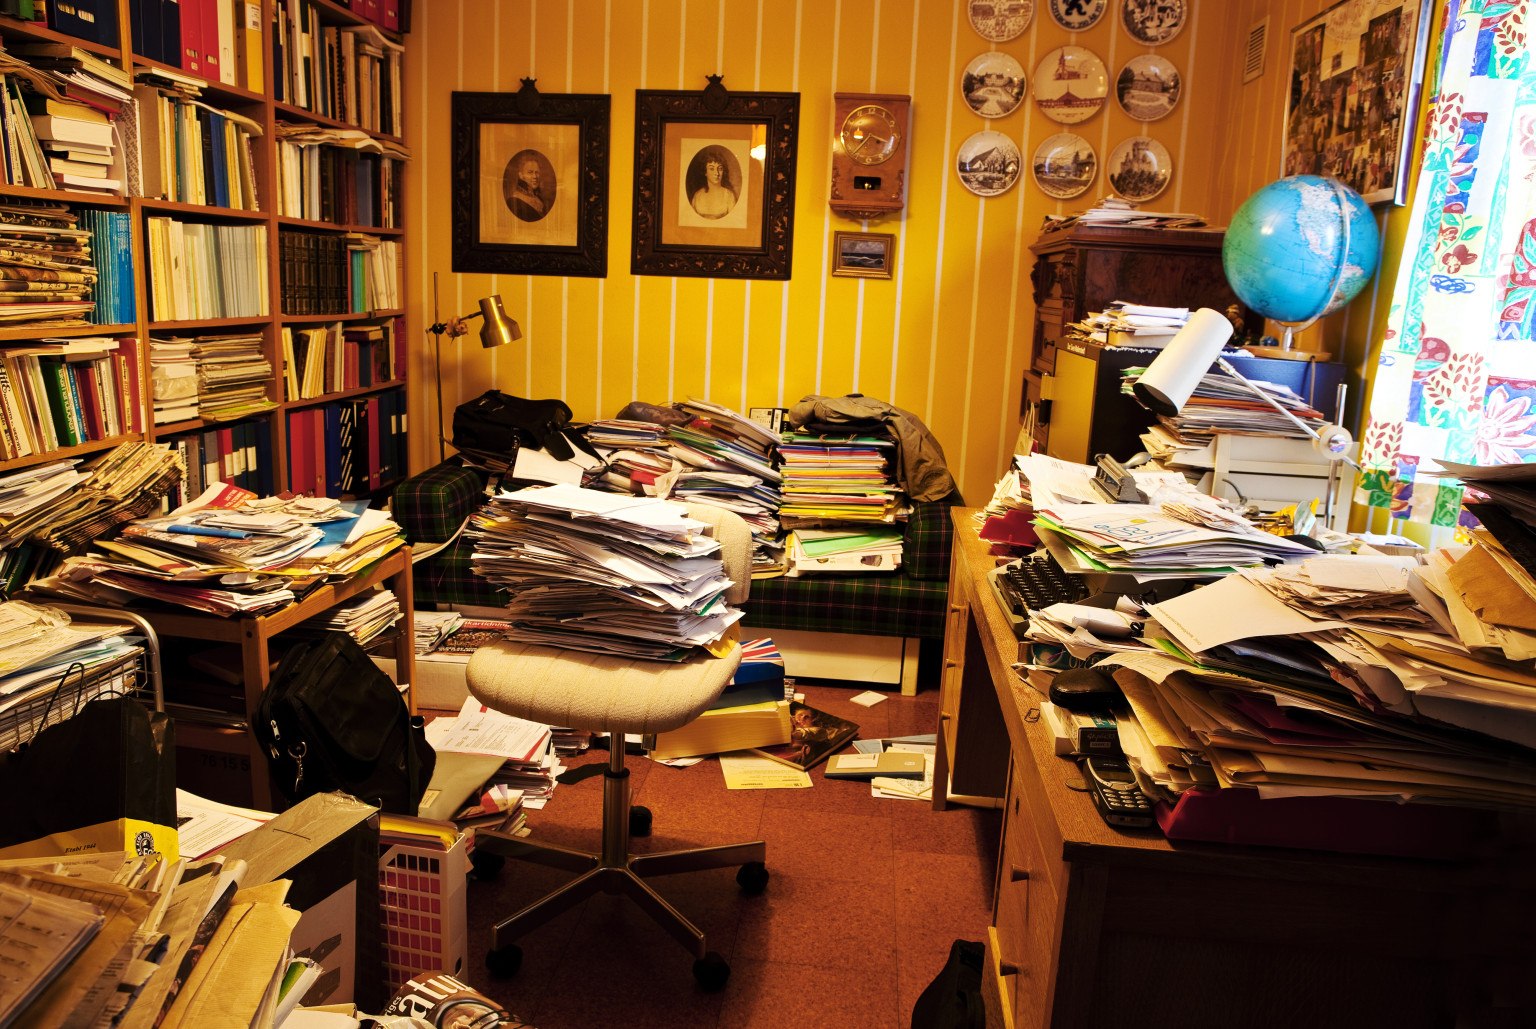 Messy Environment Can Breed Creativity And Productivity